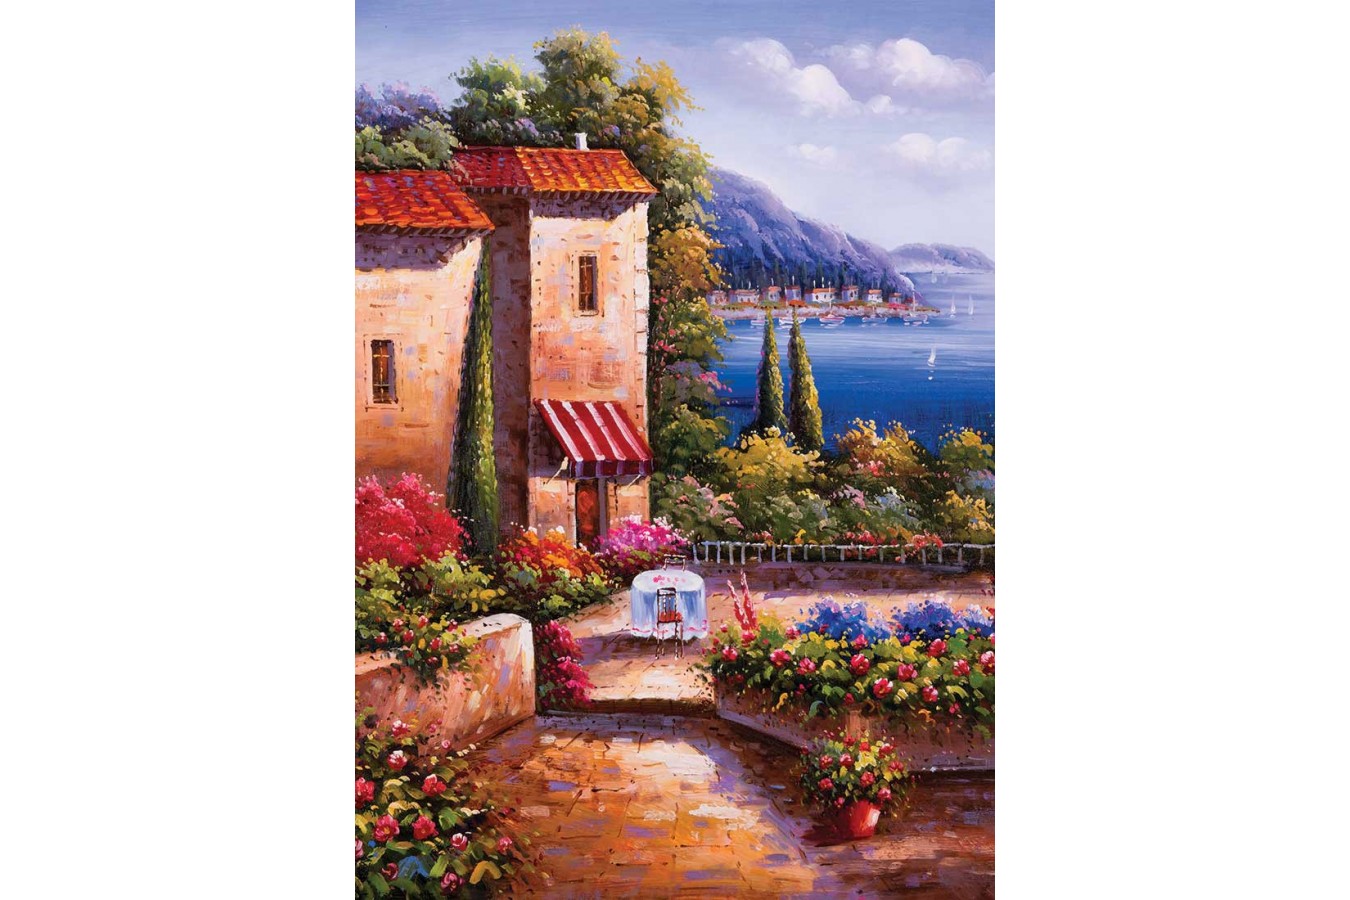 Puzzle KS Games - Spring In Florence, 500 piese (KS-Games-11340)